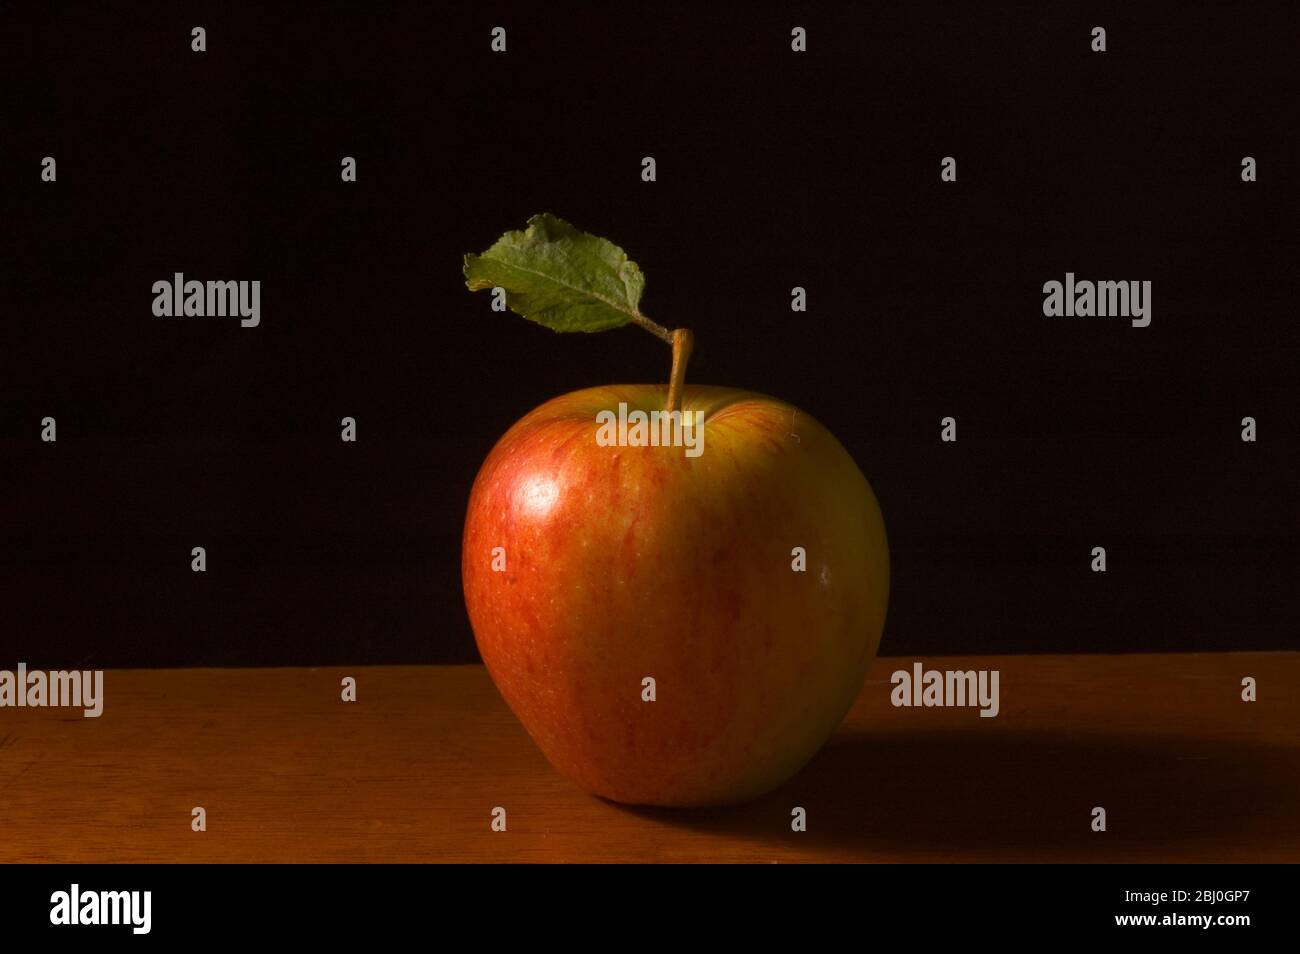 Apple with leaf on wooden surface against black background - Stock Photo